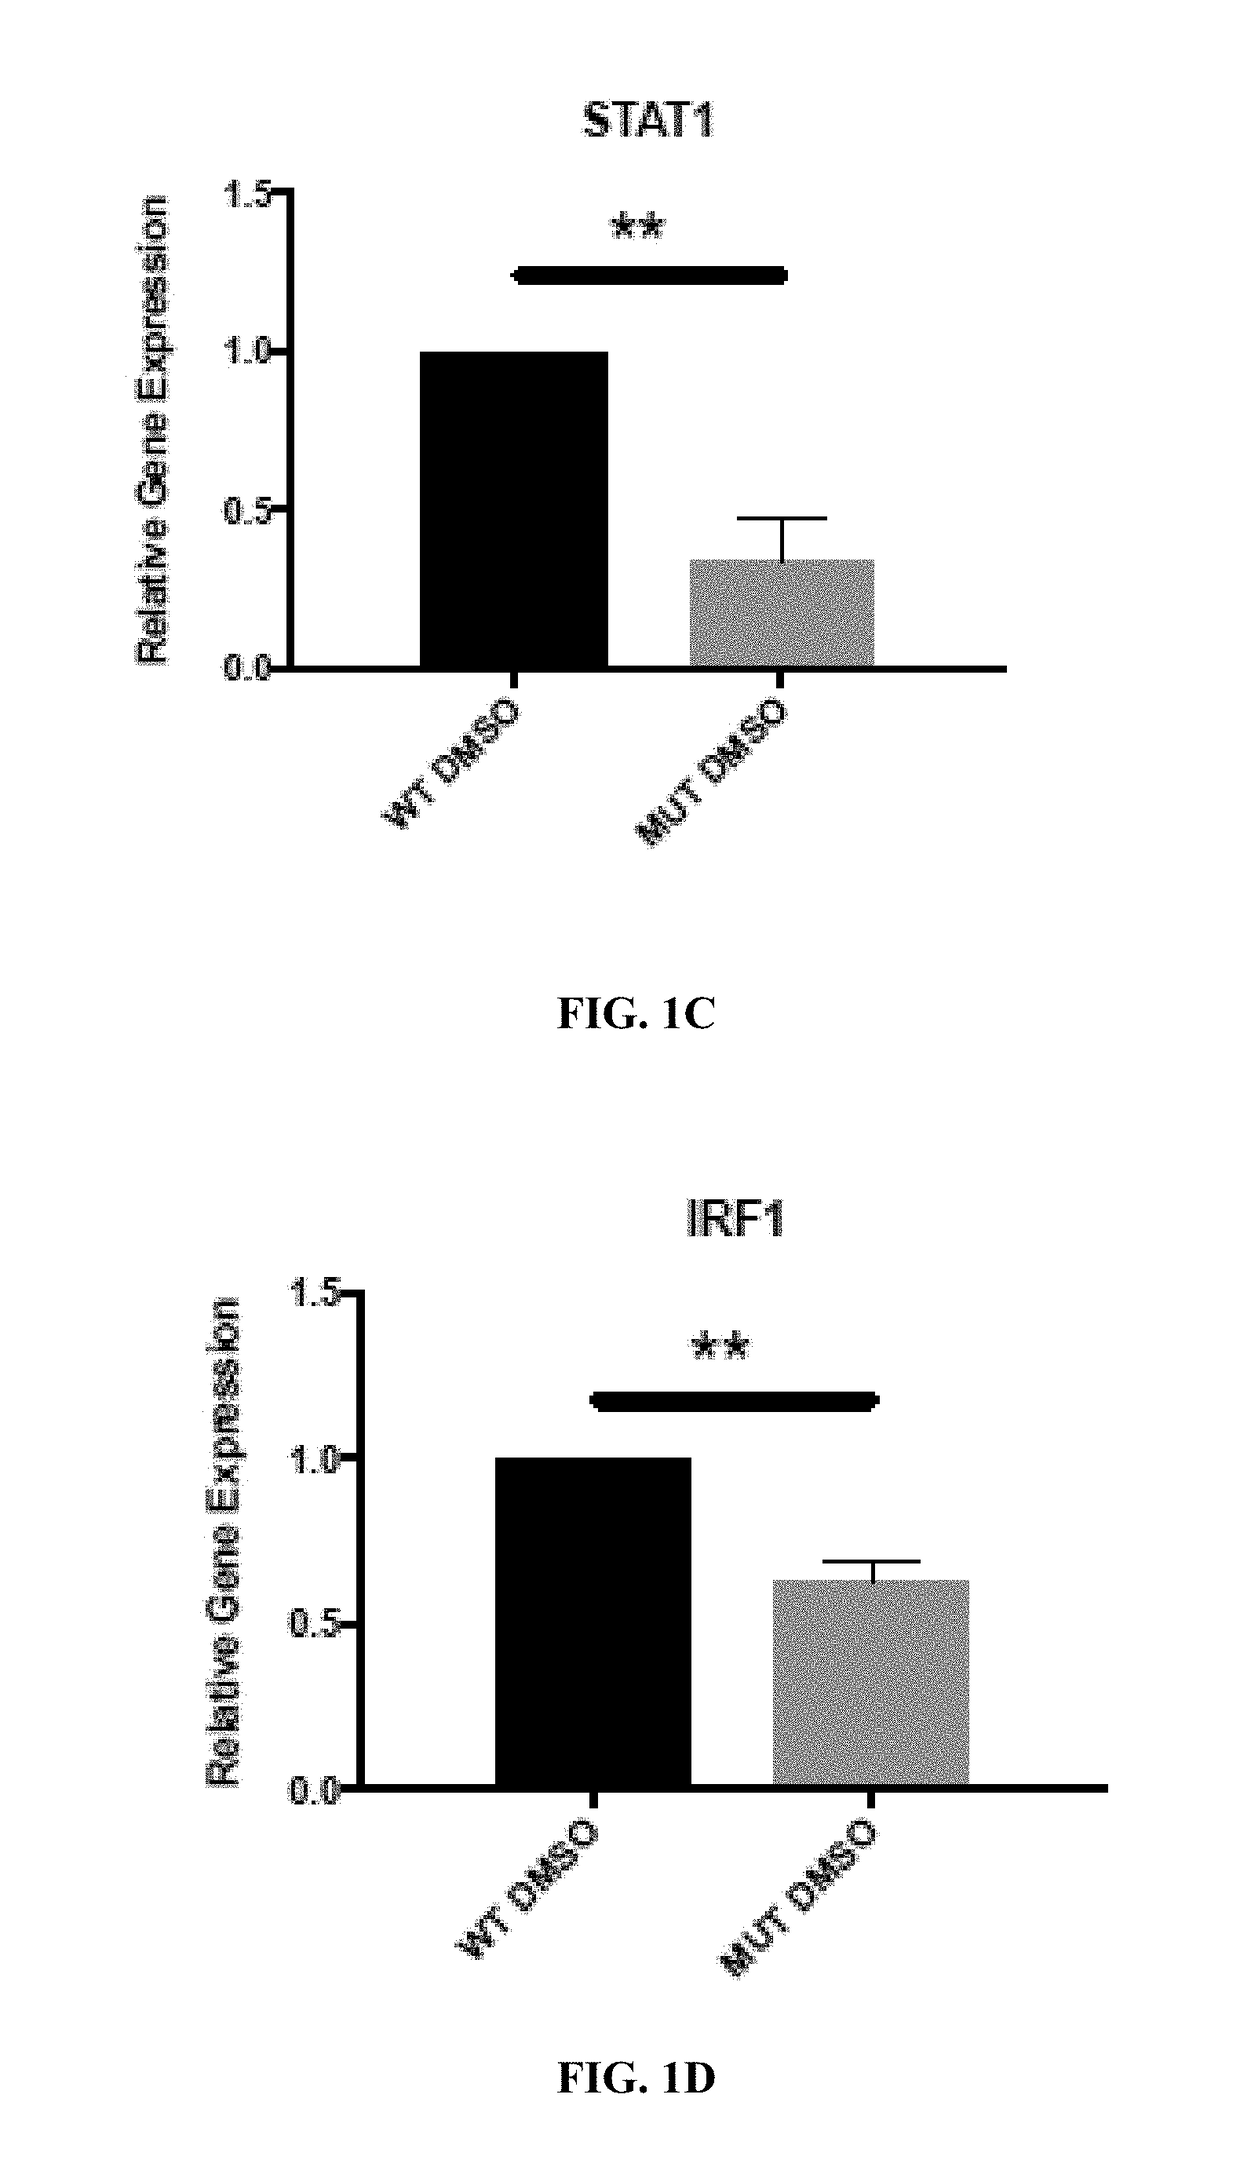 Retinoid compositions and methods of increasing immune cell-mediated killing of idh mutant cancer cells